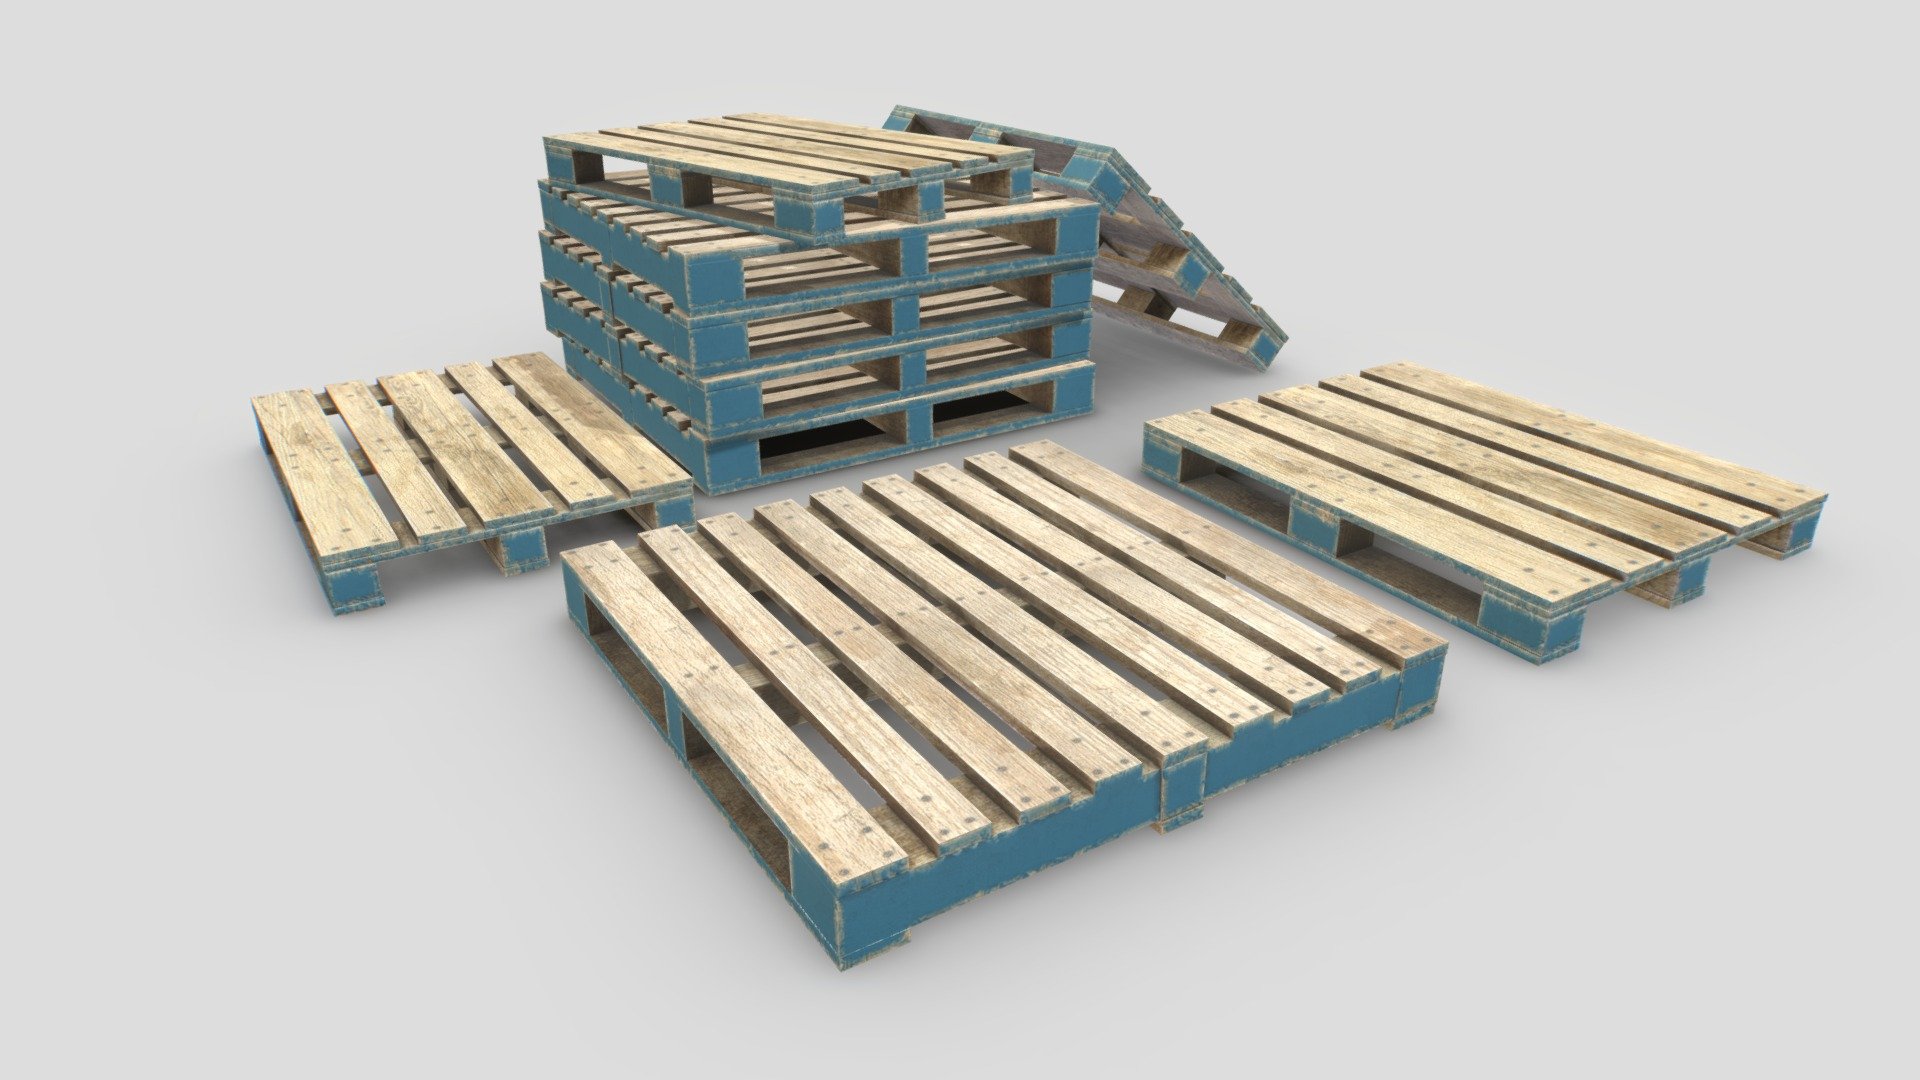 Industrial pallets based in real ones. 3 pallets included: 1200x1200 1200x1000and 1200x800cm

Comes with 1 set of PBR 4096p textures including Albedo, Normal, Roughness, Metalness and AO.

Suitable for factories, hangars, warehouses, construction sites, trucks, etc..

Realistic scale. Total verts 600, polys 1100

Pallet1 270verts.

Pallet2 160verts.

Pallet3 160verts - Industrial Wooden Pallet 1 - Buy Royalty Free 3D model by 32cm 3d model